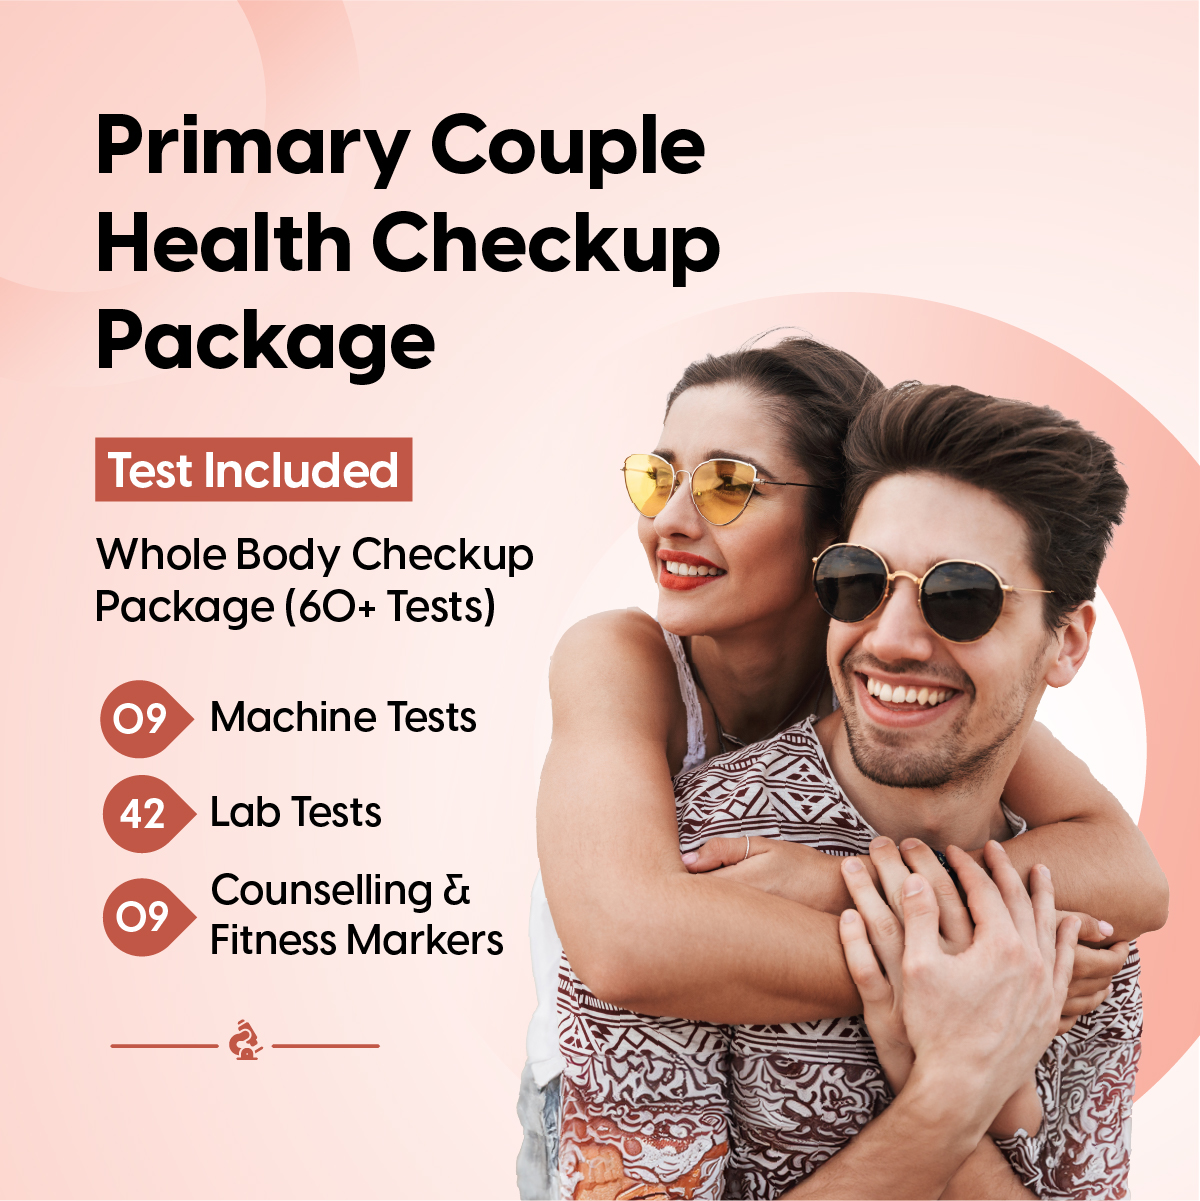 Primary Couple Health Checkup Package